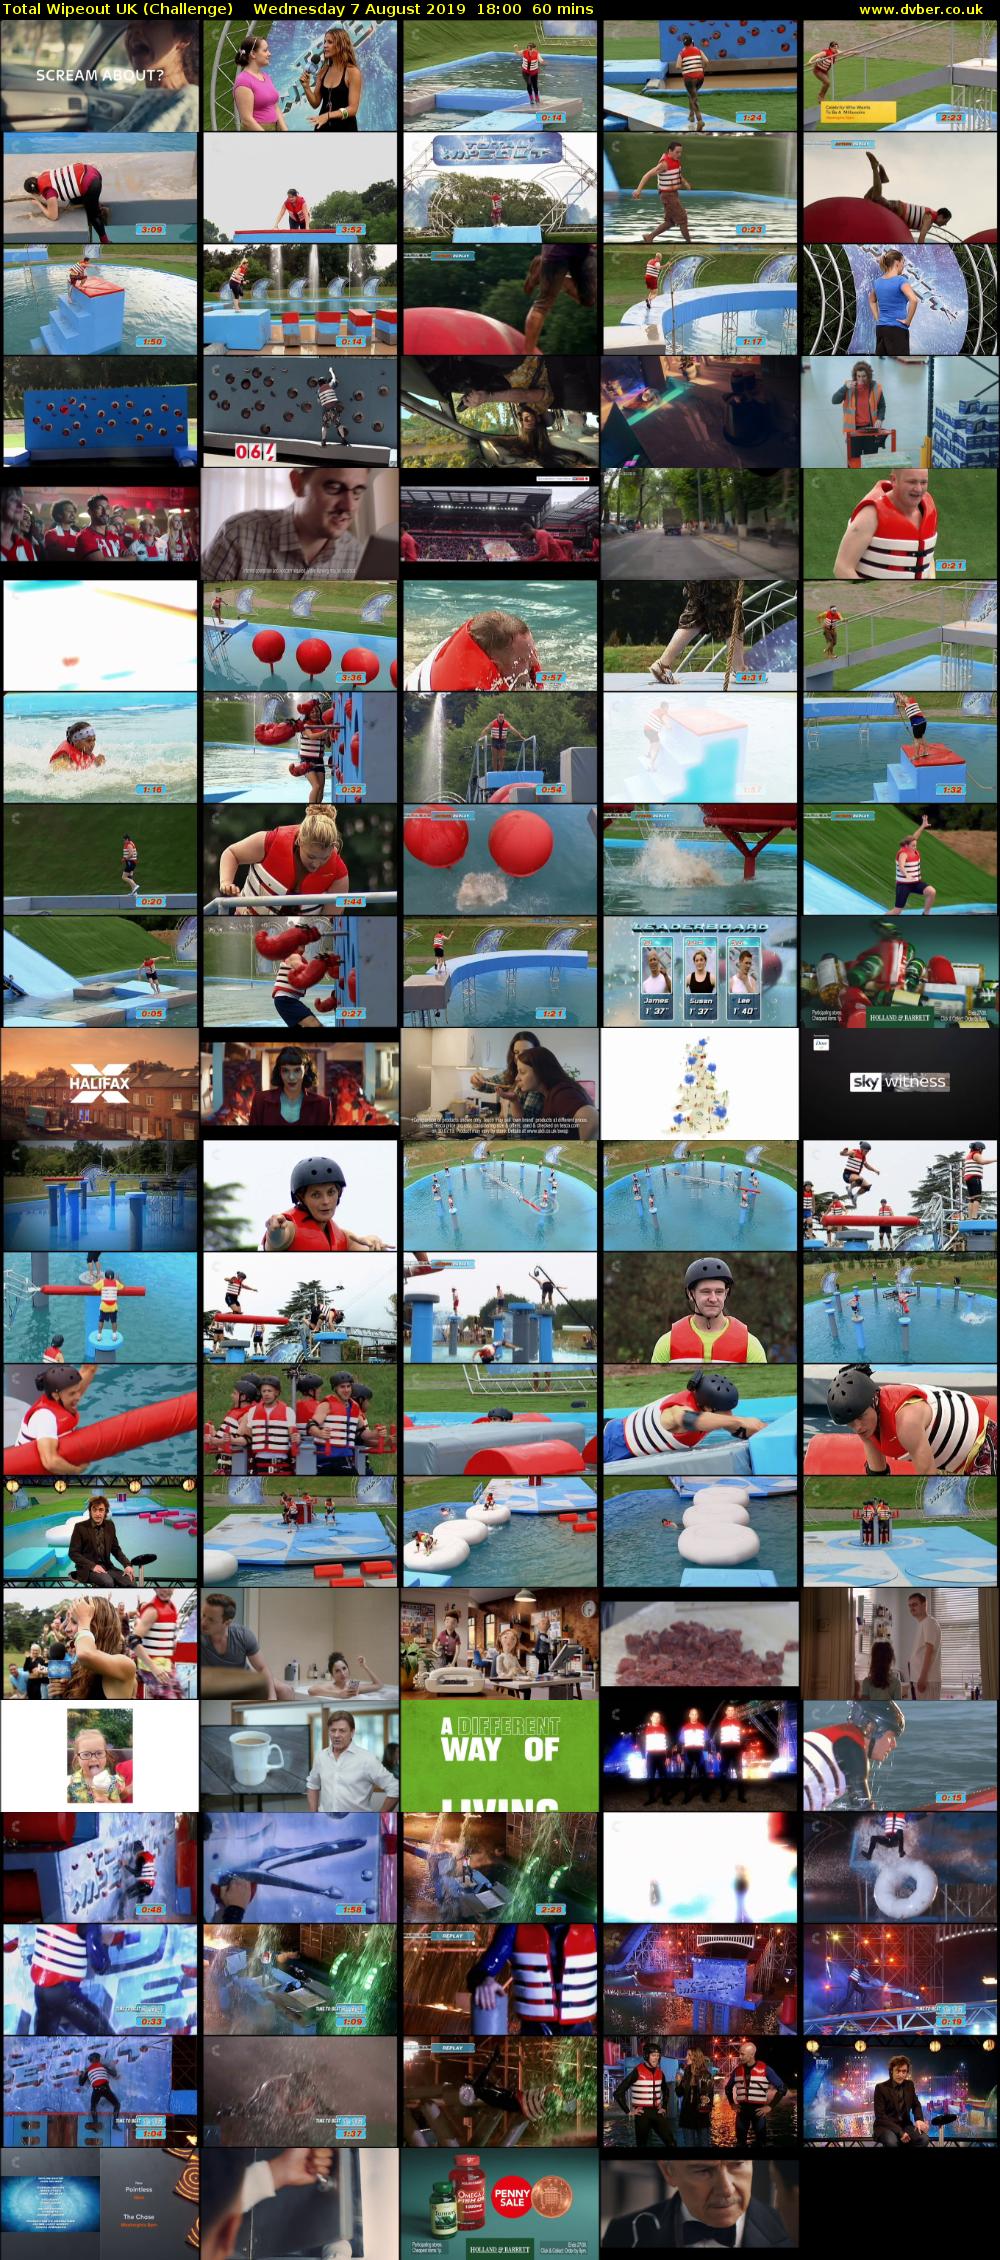 Total Wipeout UK (Challenge) Wednesday 7 August 2019 18:00 - 19:00